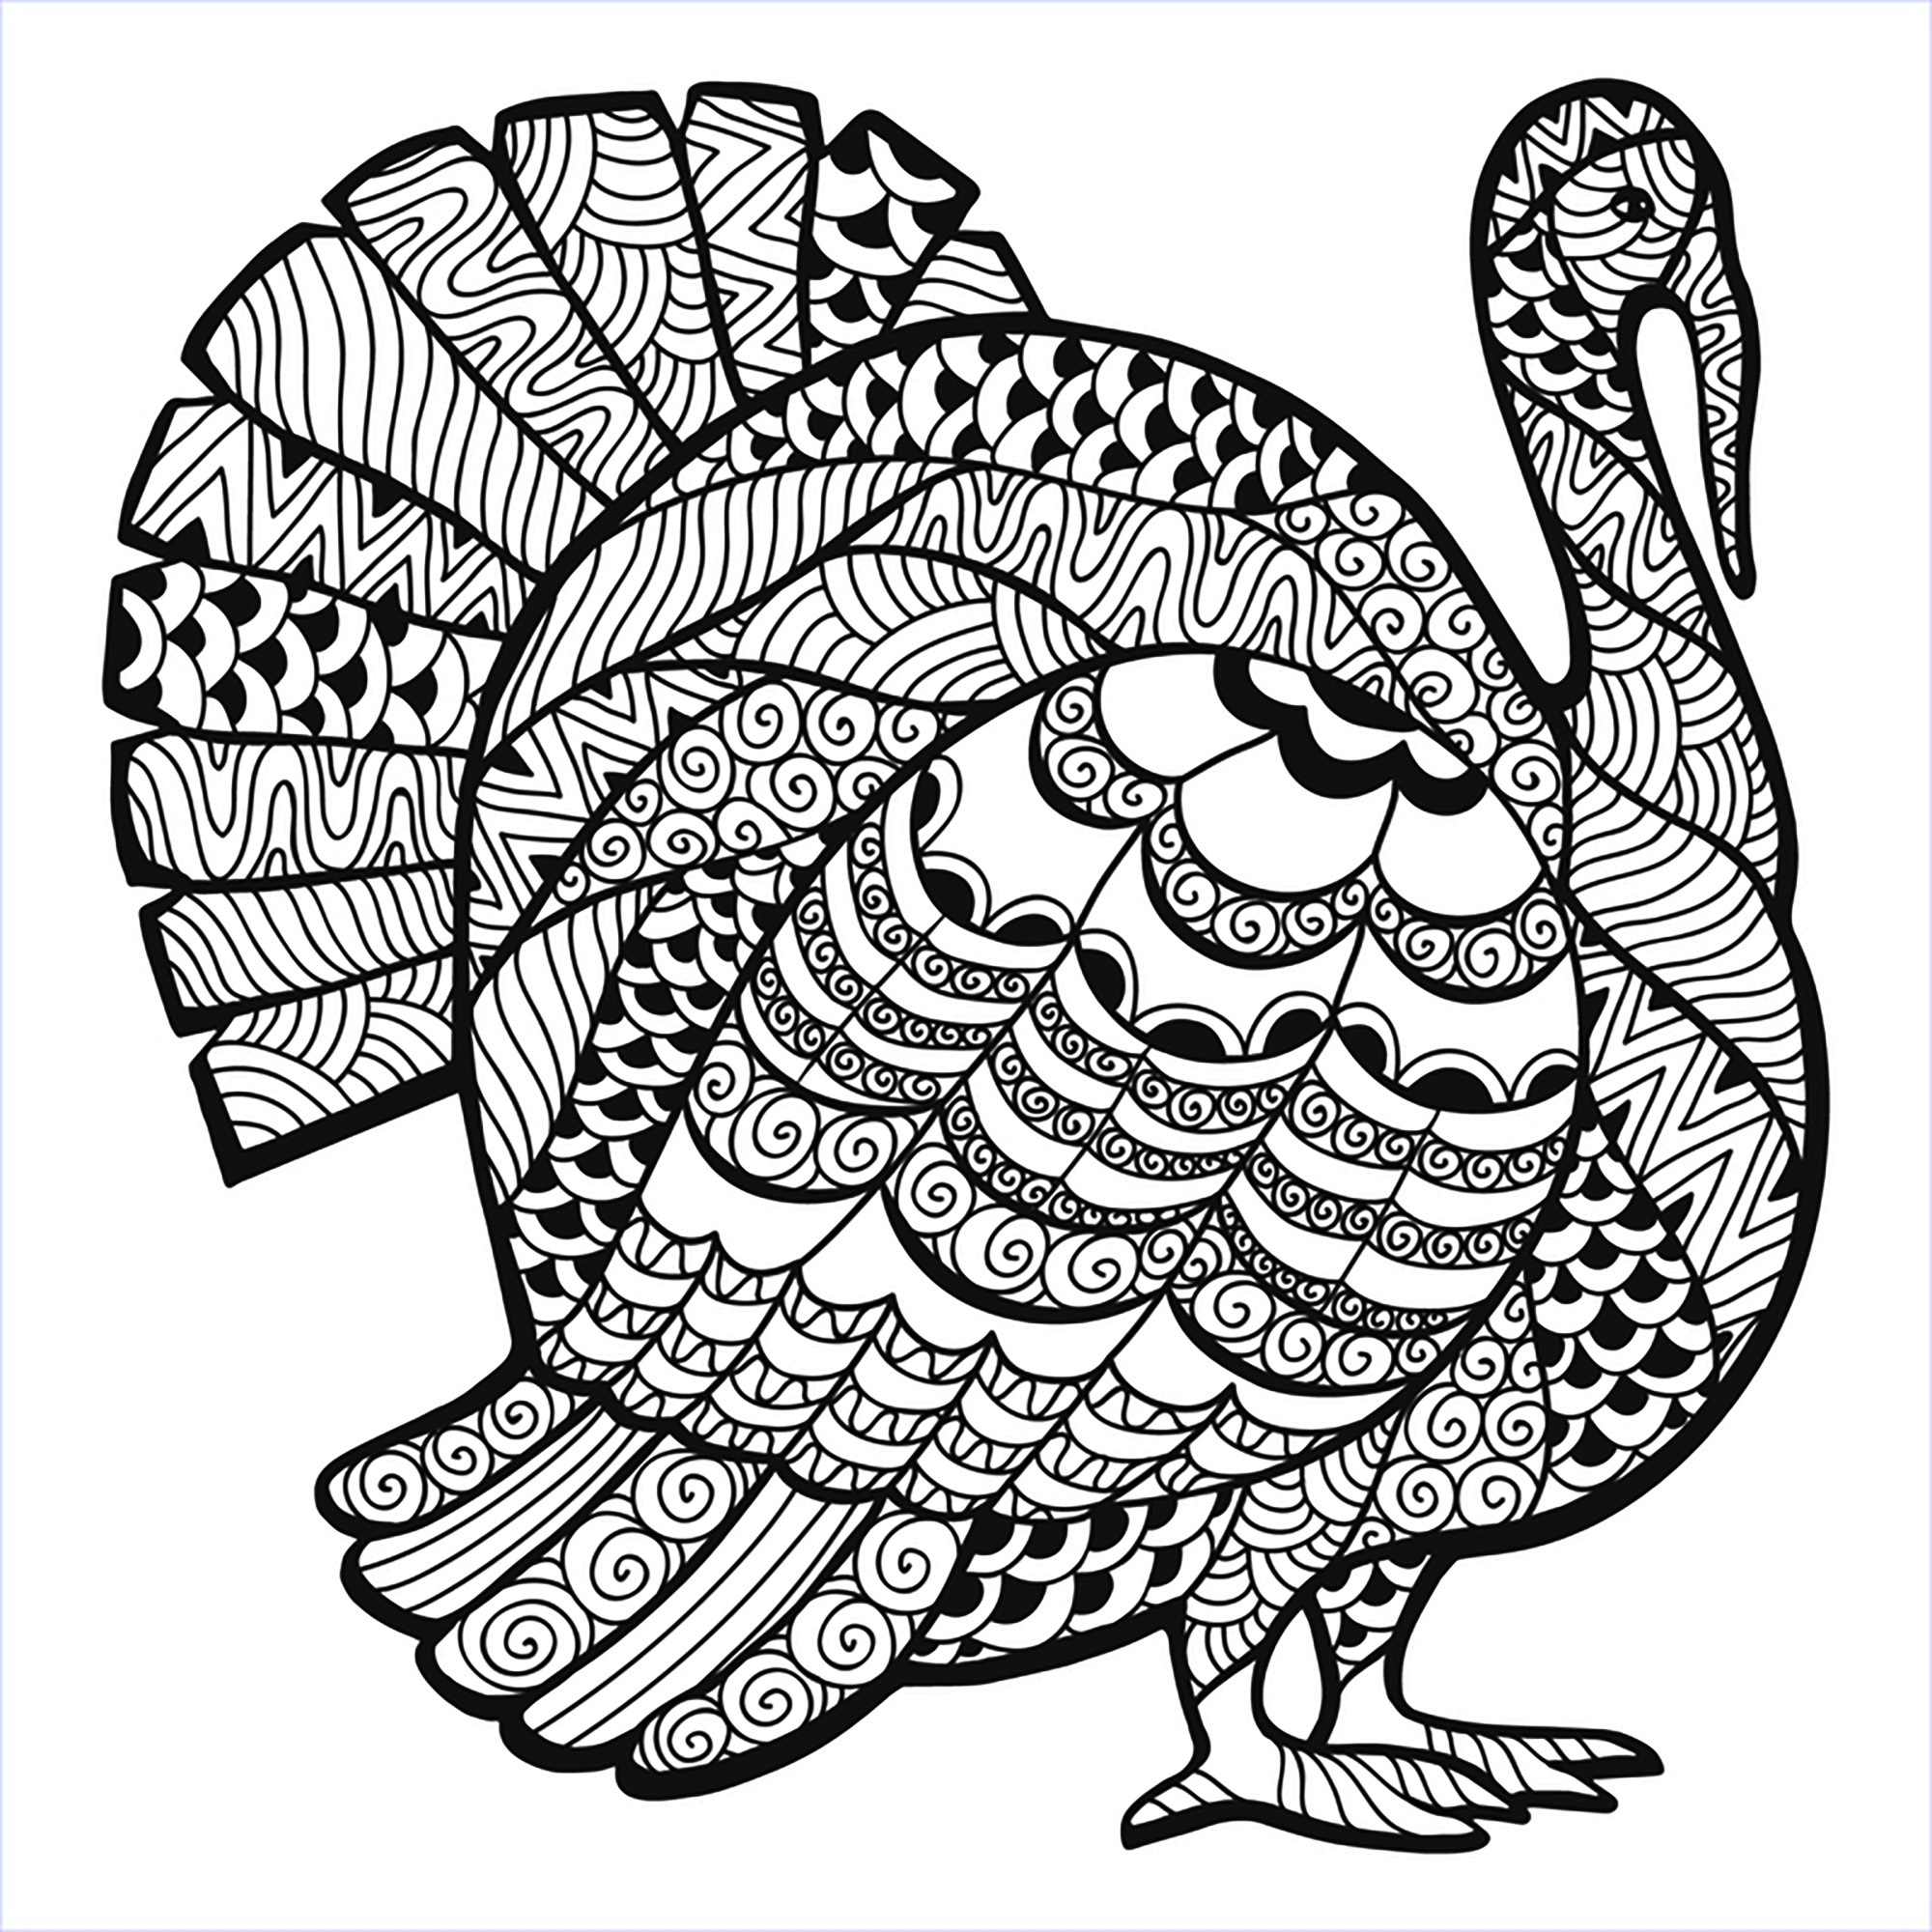 Turkey Zentangle Coloring sheet - Thanksgiving Adult Coloring Pages